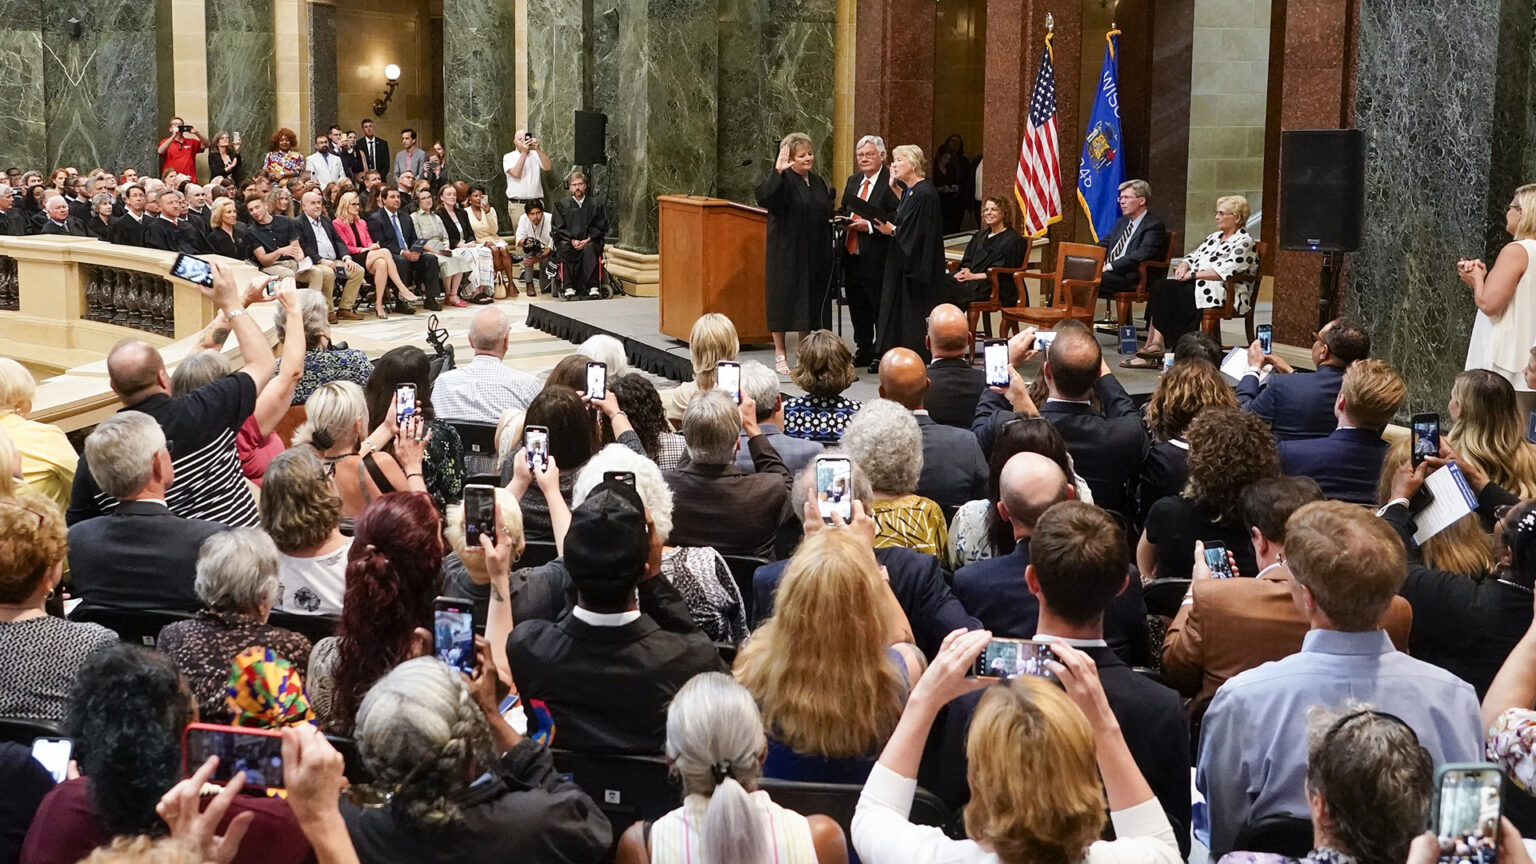 Janet Protasiewicz raises her right hand while standing next to a wood podium and facing Ann Walsh Bradley, in a circular space with marble masonry, the U.S. and Wisconsin flags and portable loudspeakers, with people seated on either side watching the proceedings and many recording or taking photos with their mobile devices.